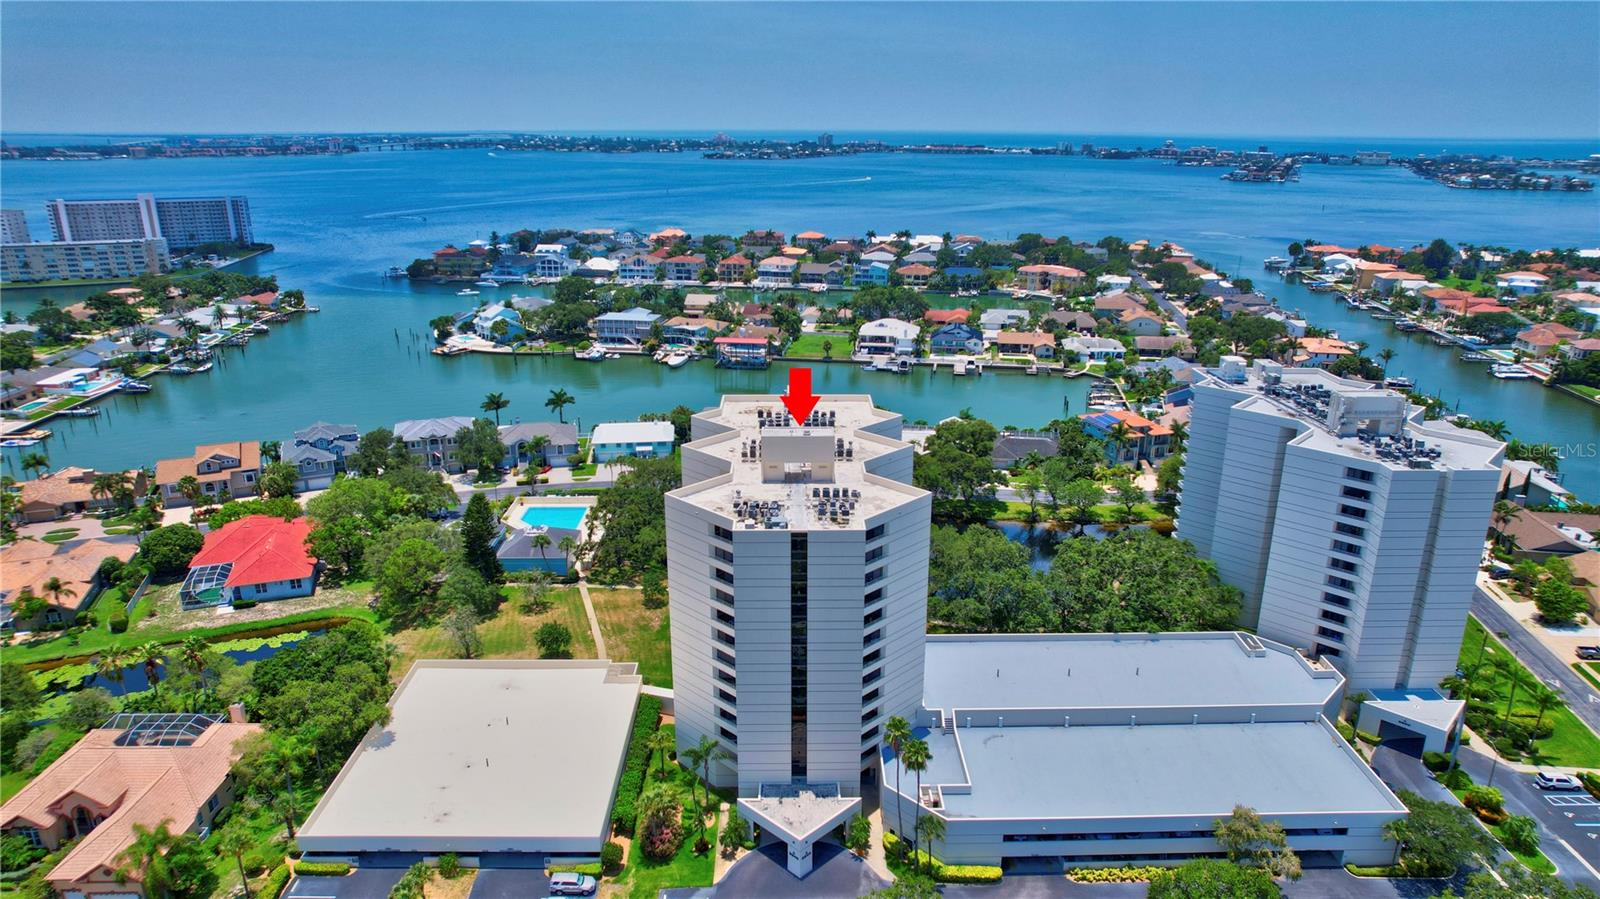 Bay and Gulf Panoramic views from your 9th floor condominium